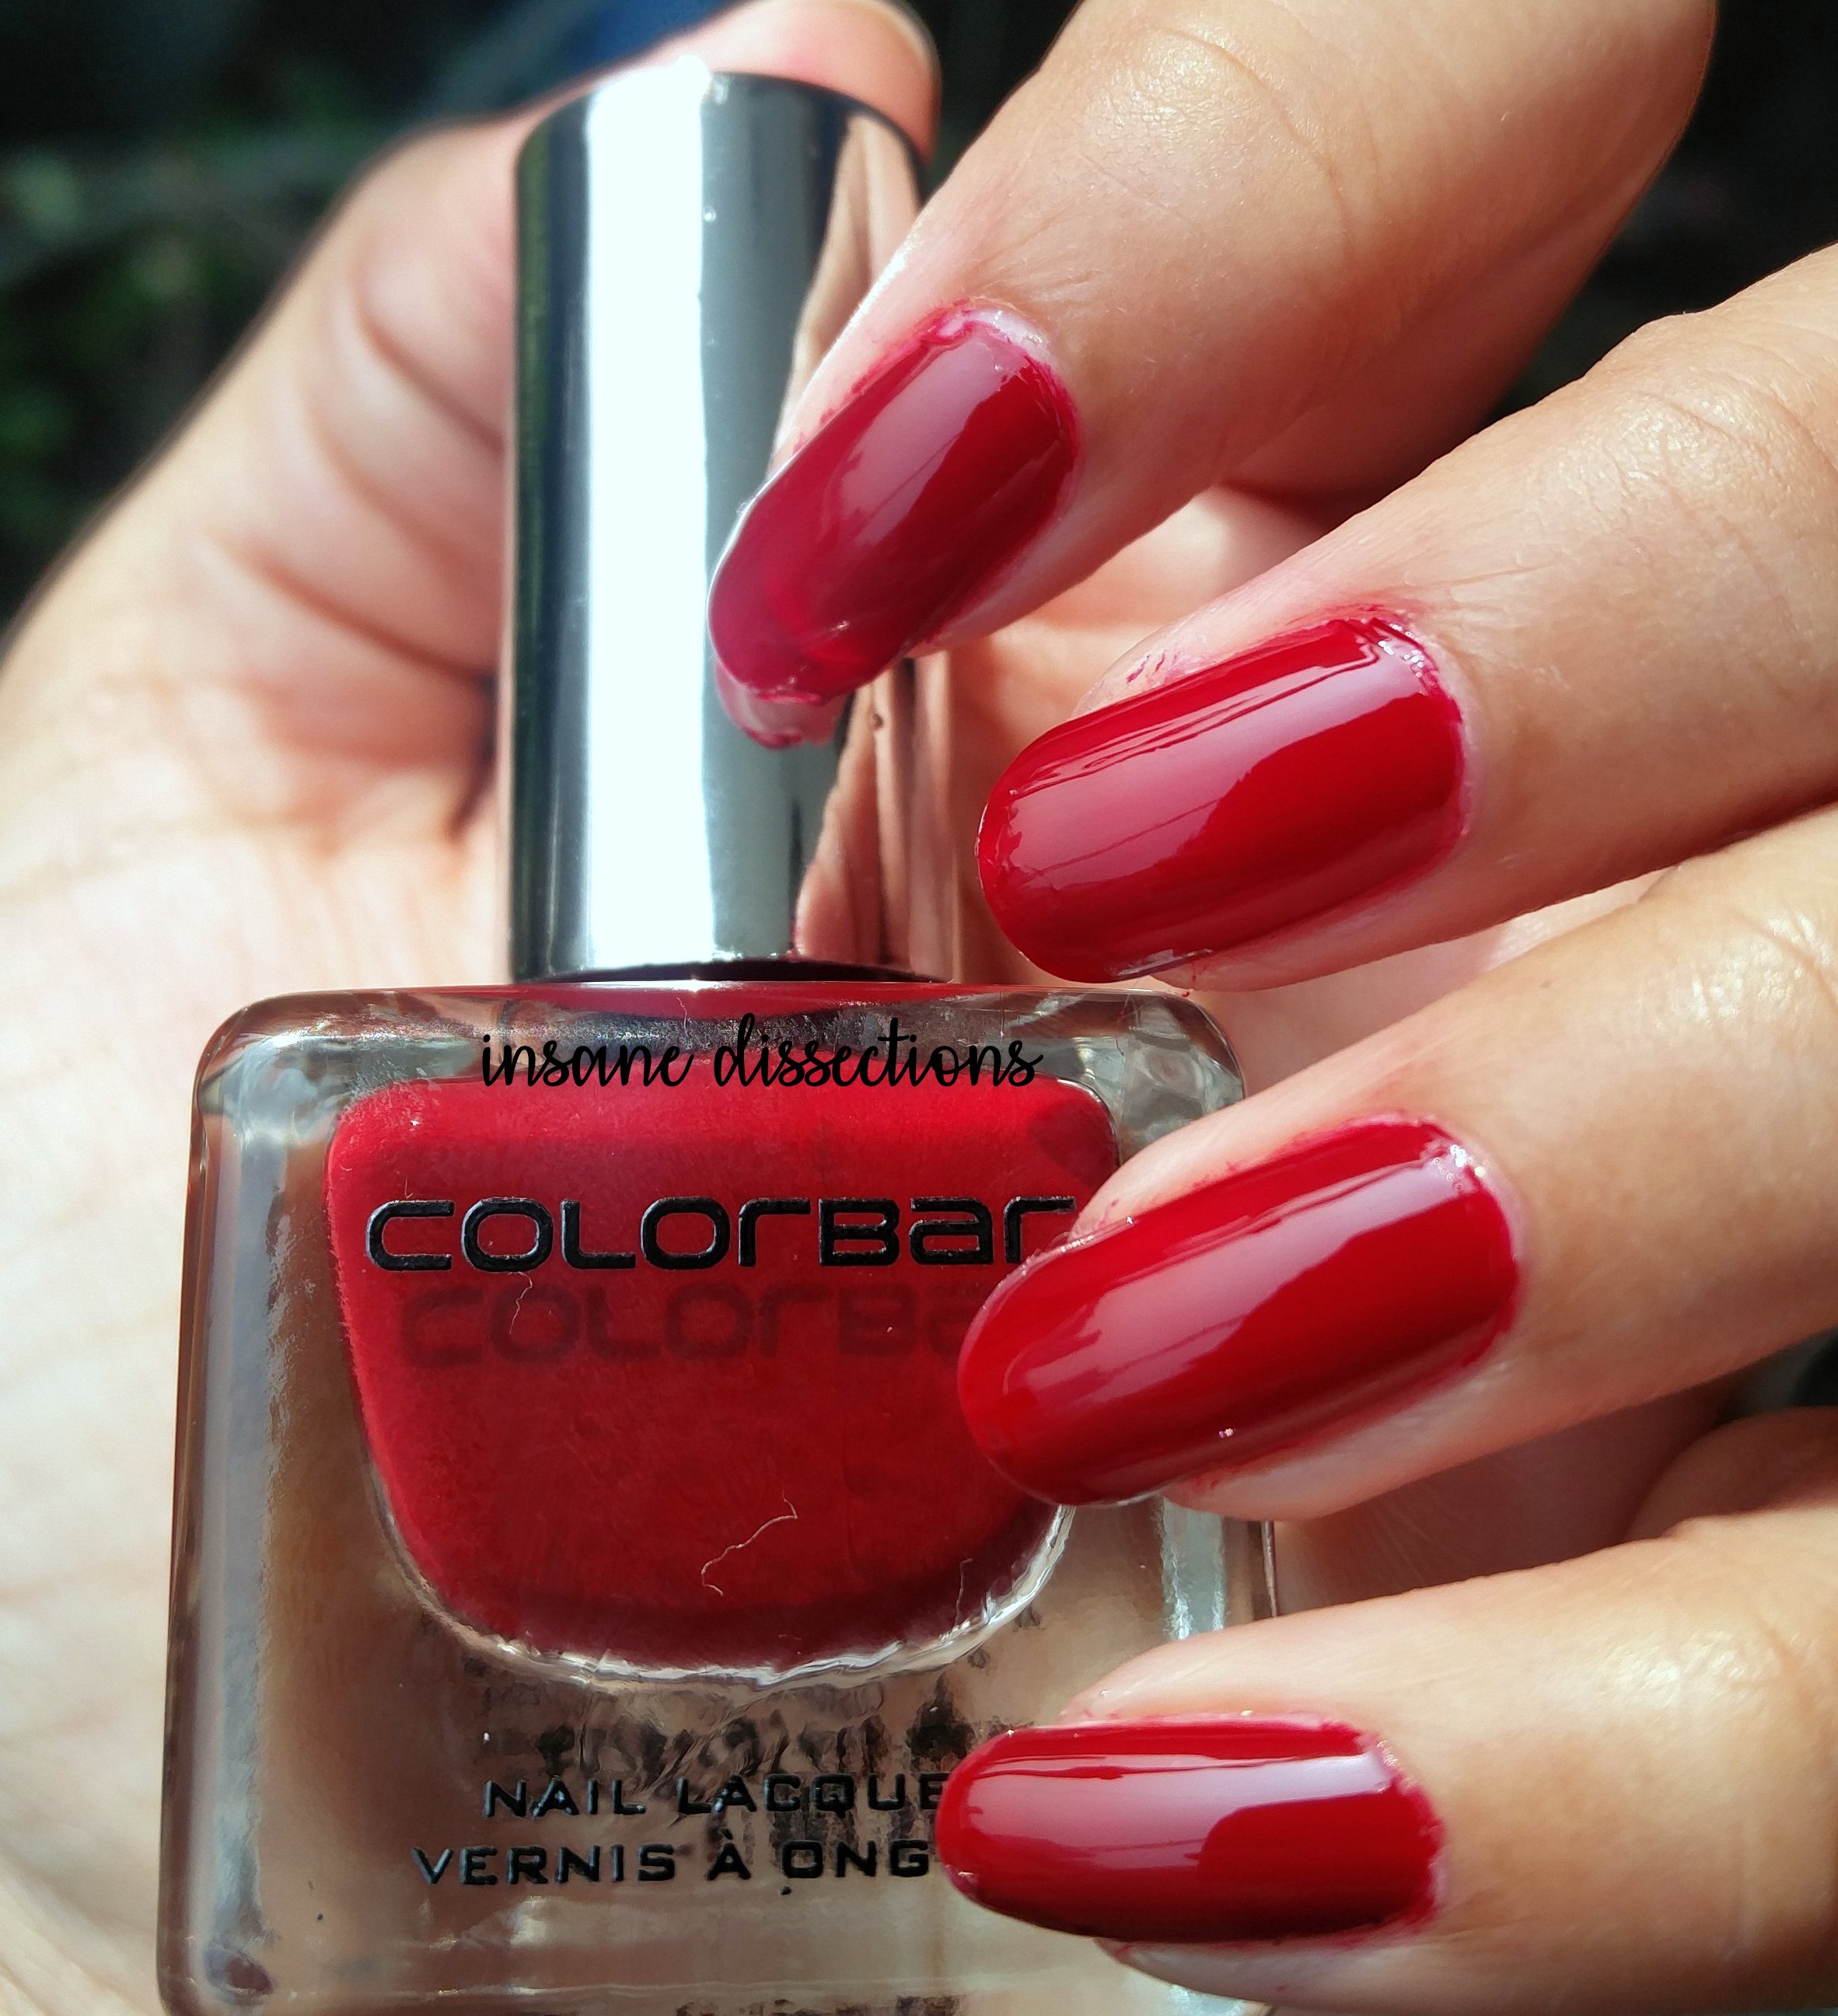 Colorbar Luxe Nail Paint Free Gift Price - Buy Online at Best Price in India